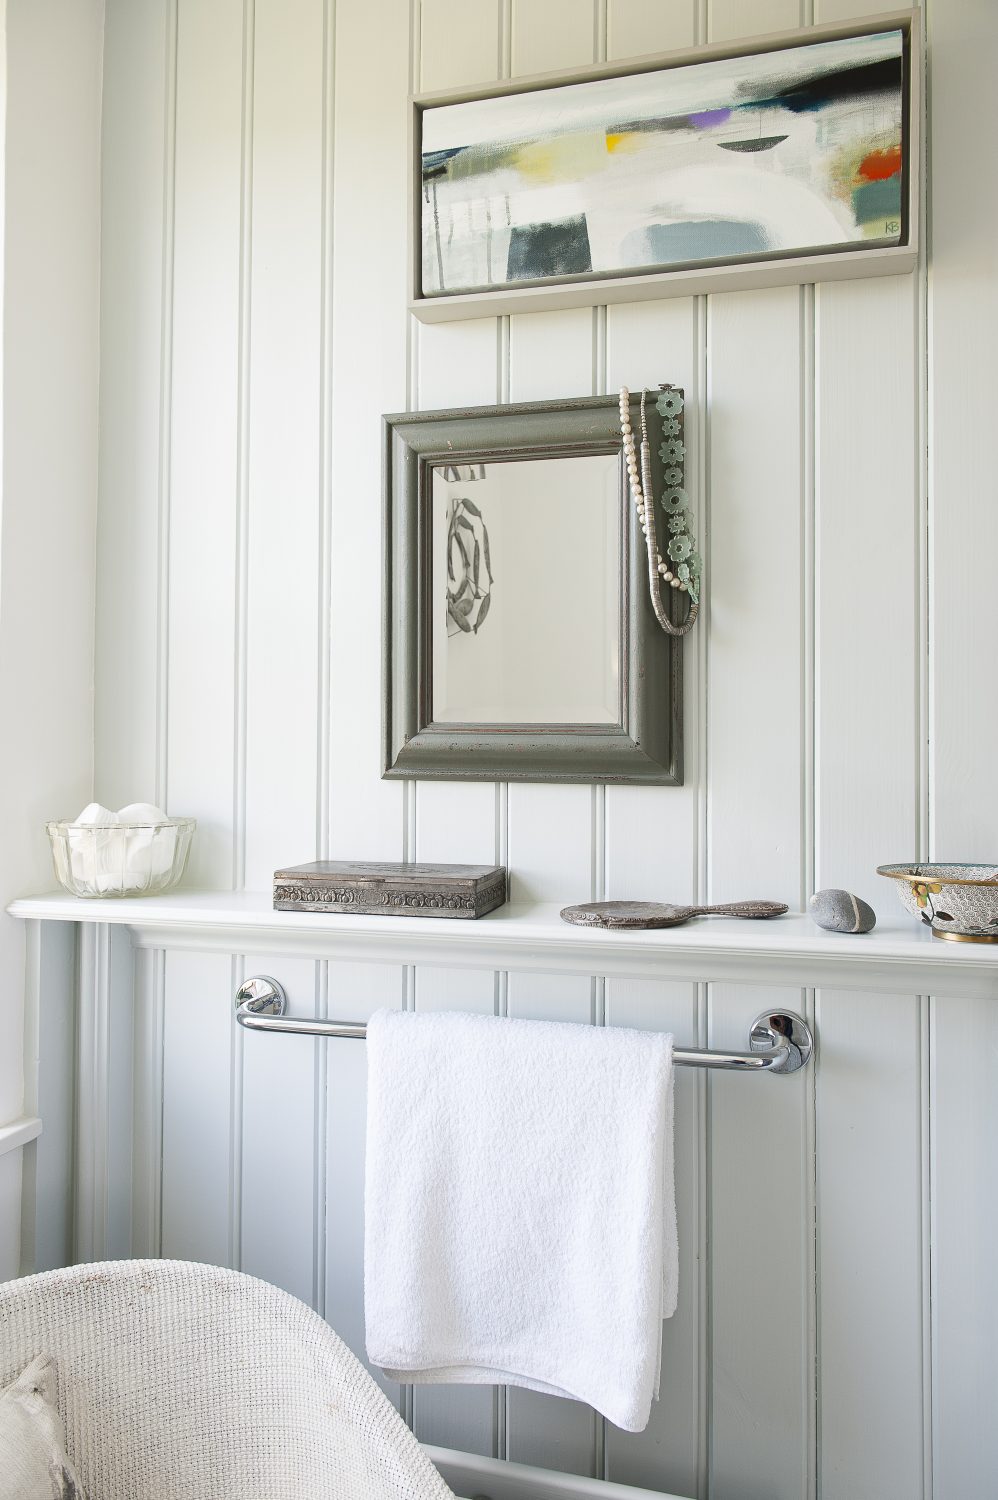 The bathroom features a soft, sea coloured scheme with shells and beach finds arranged on shelves and windowsills. The loo is partitioned away from the bath area, making it separate, but still part of the room